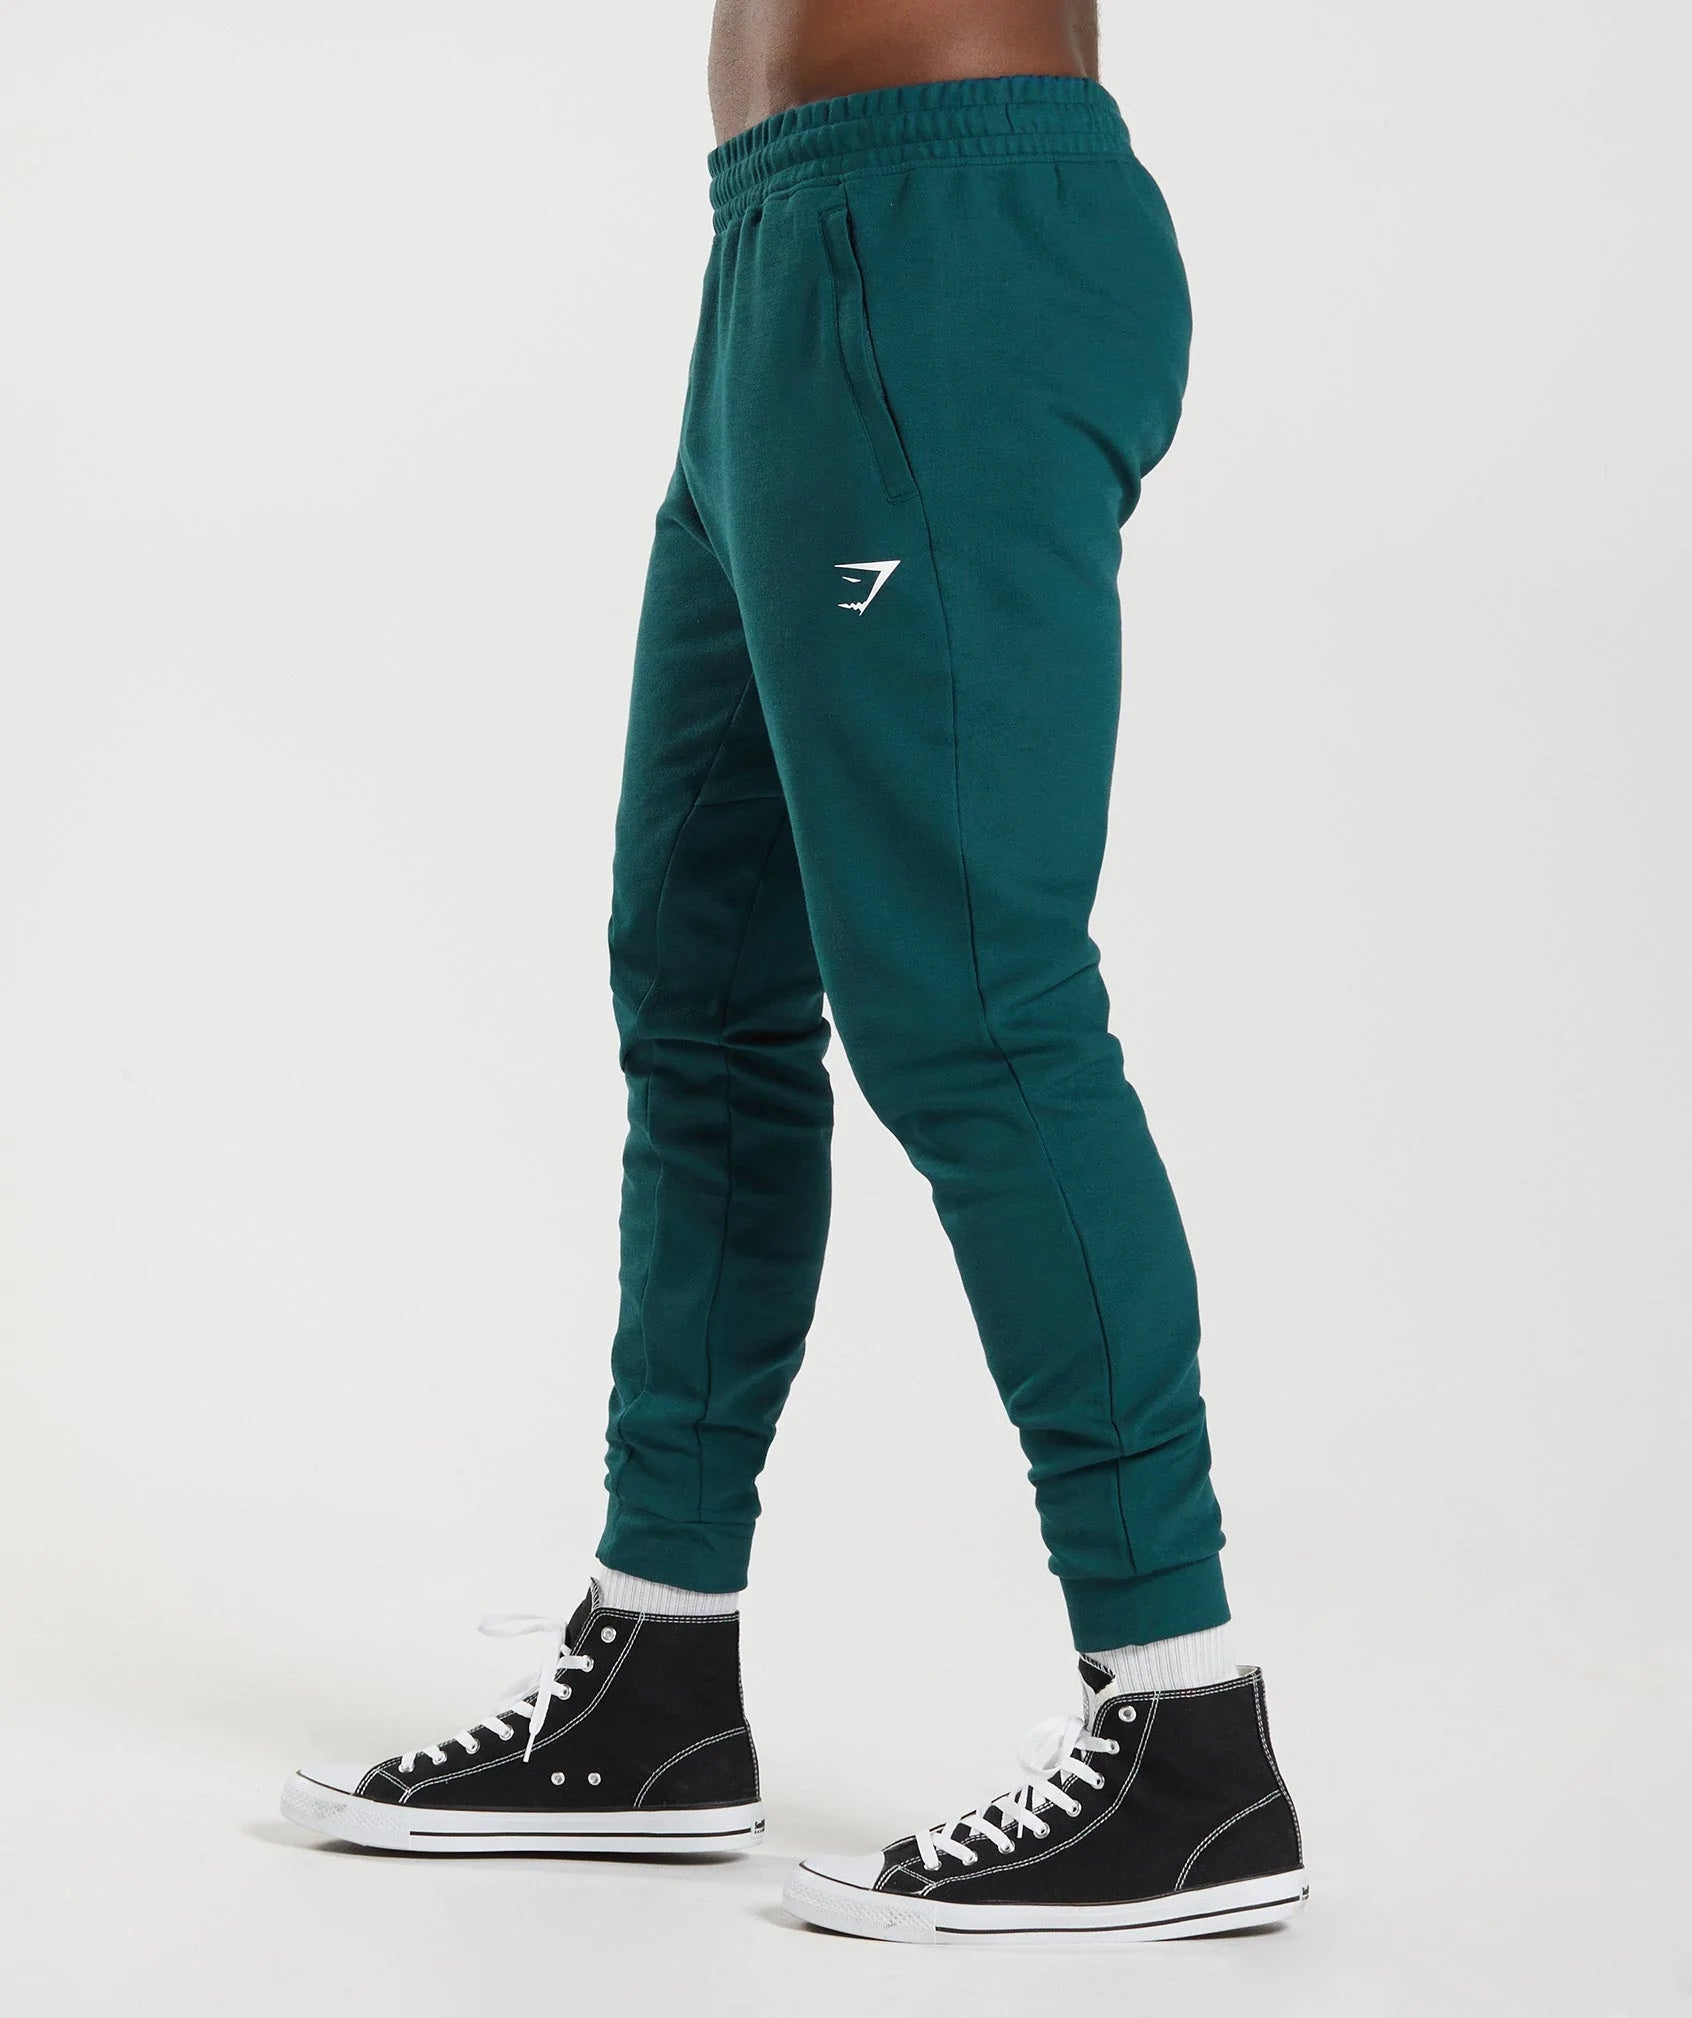 React Joggers in Winter Teal